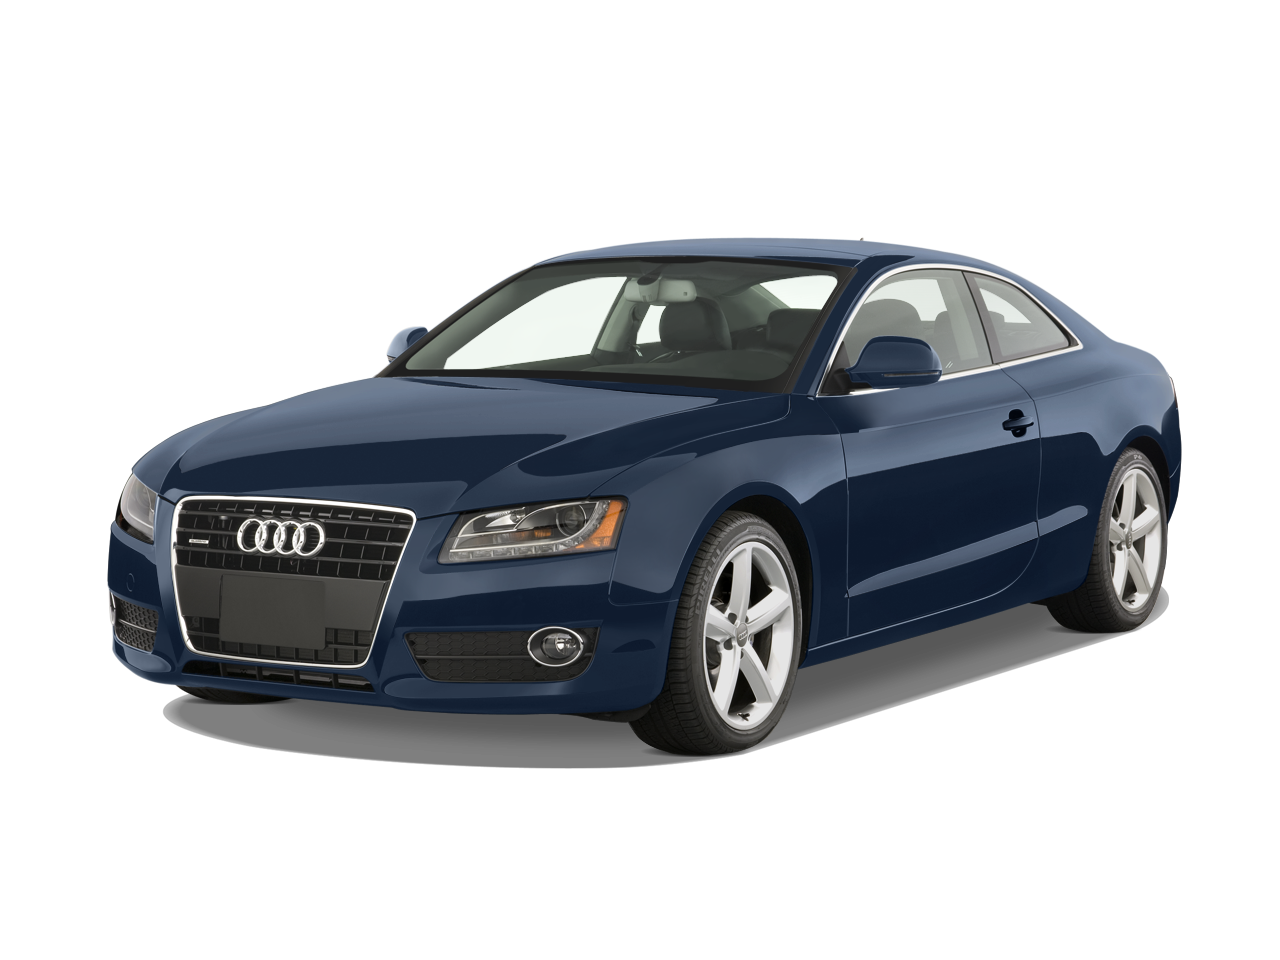 2008 Audi A5 Prices, Reviews, and Photos - MotorTrend